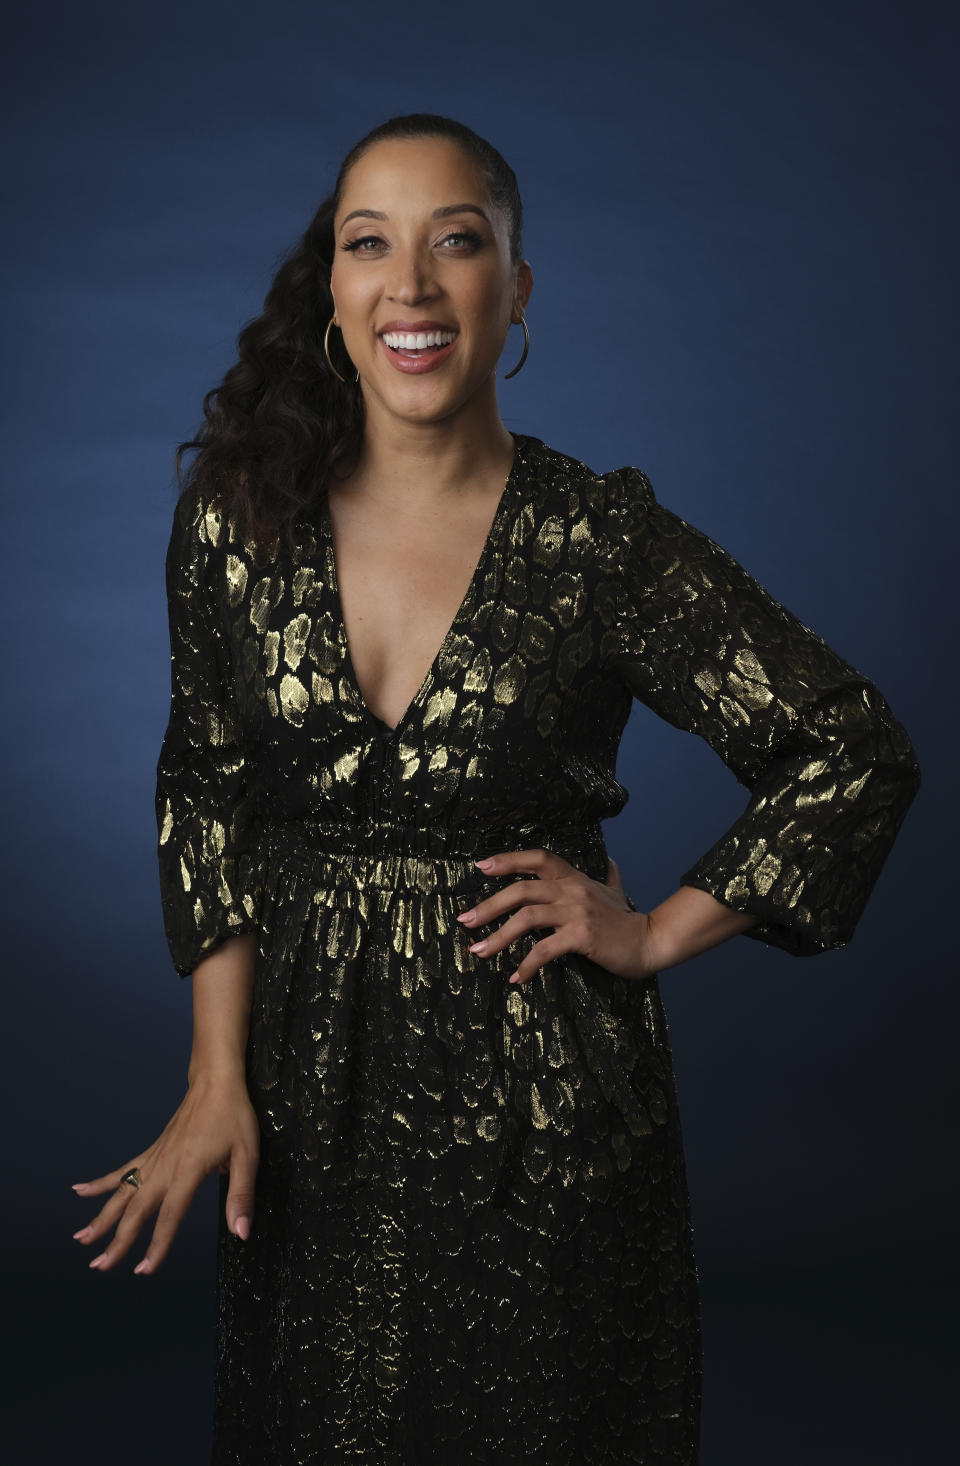 FILE - In this Wednesday, July 24, 2019, file photo, Robin Thede, the creator, star and executive producer of the HBO comedy series "A Black Lady Sketch Show," poses for a portrait during the 2019 Television Critics Association Summer Press Tour at the Beverly Hilton, in Beverly Hills, Calif. The six-episode series offers sketches written and performed by an all-black female cast. (Photo by Chris Pizzello/Invision/AP, File)